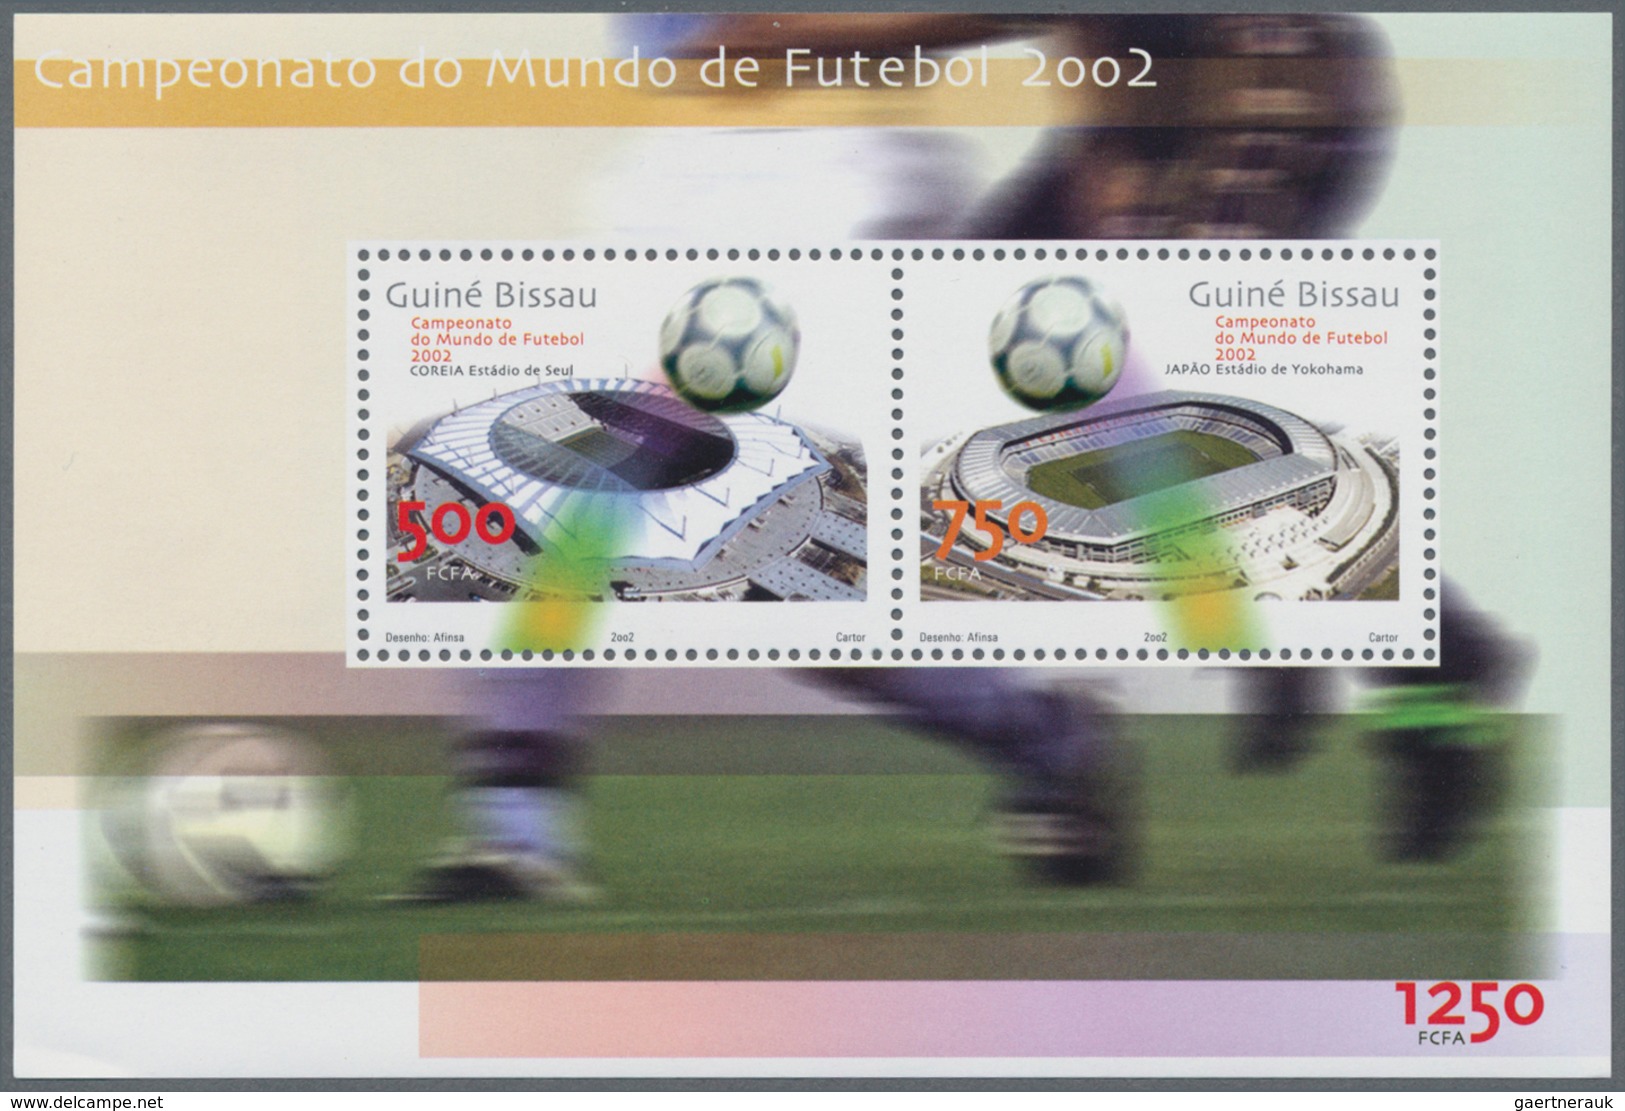 Guinea-Bissau: 2002, WORLD CUP, Souvenir Sheet, Investment Lot Of 1000 Copies Mint Never Hinged (Mi. - Guinea-Bissau